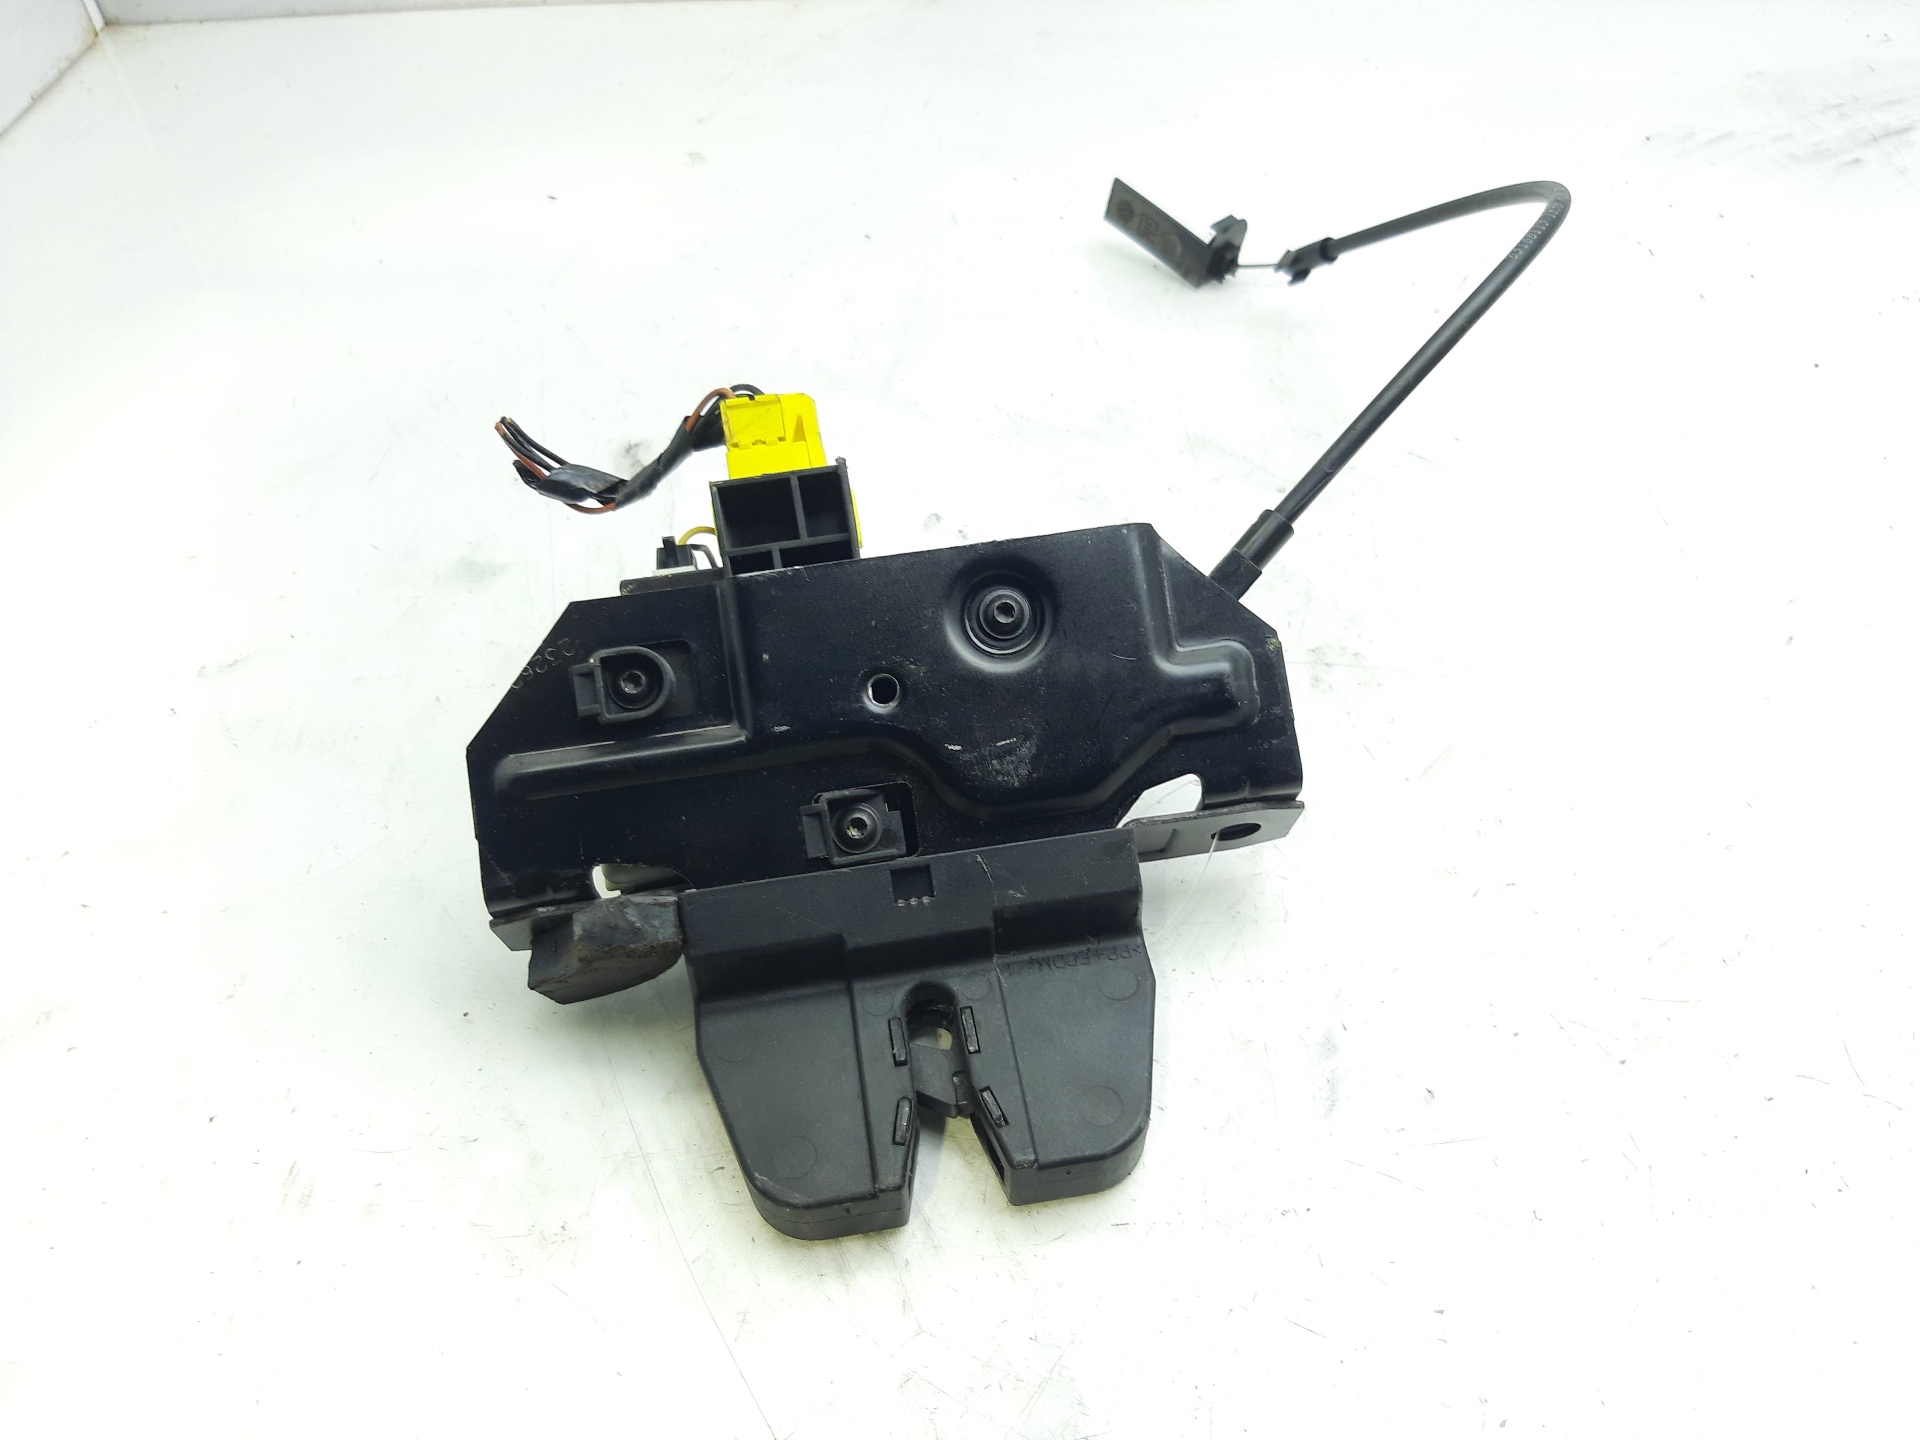 OPEL Vectra Tailgate Boot Lock 09180104 25207762